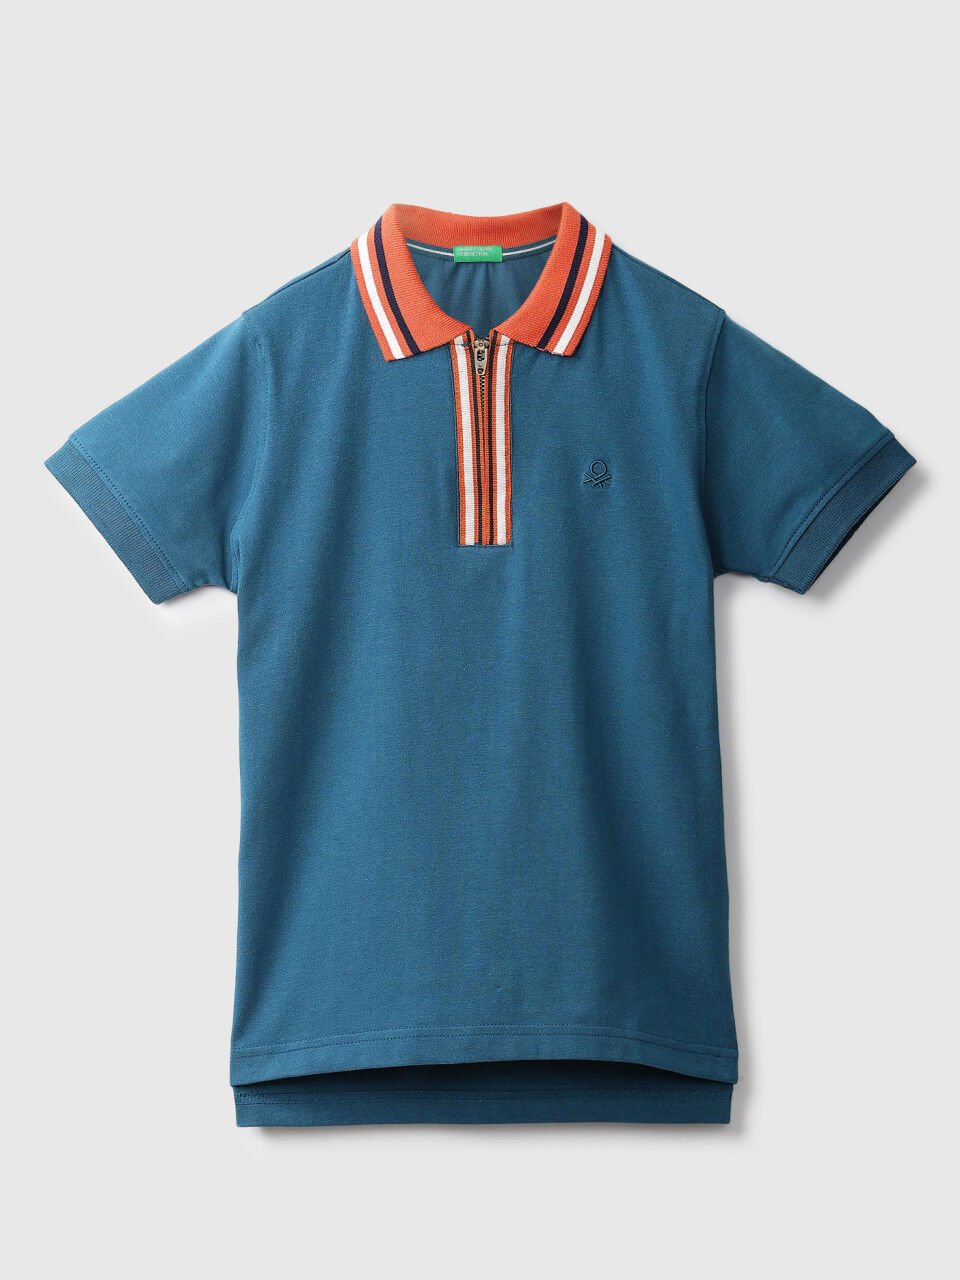 United Colors Of Benetton Teal Blue Polo T-Shirt